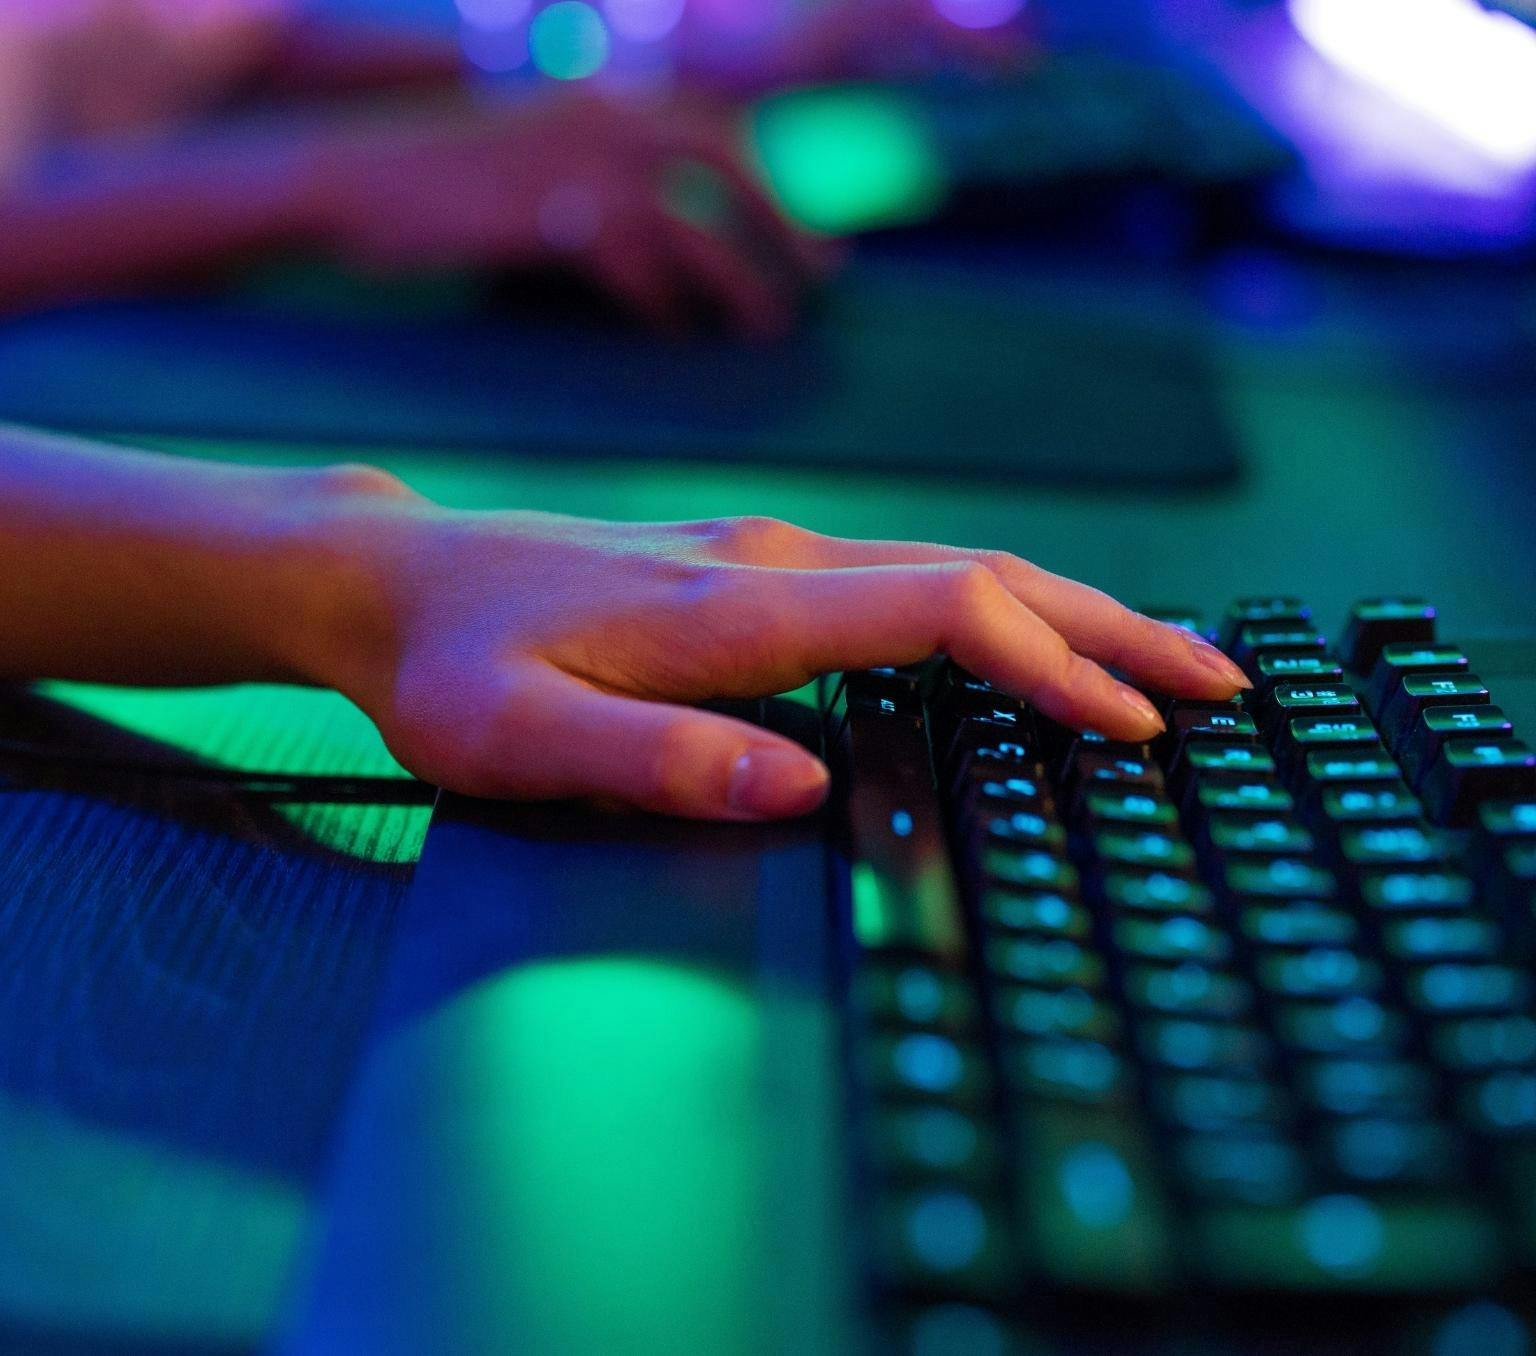 close-up of a persons hand resting on a keyboard. Green and blue light illuminates a blurred background and the keyboard